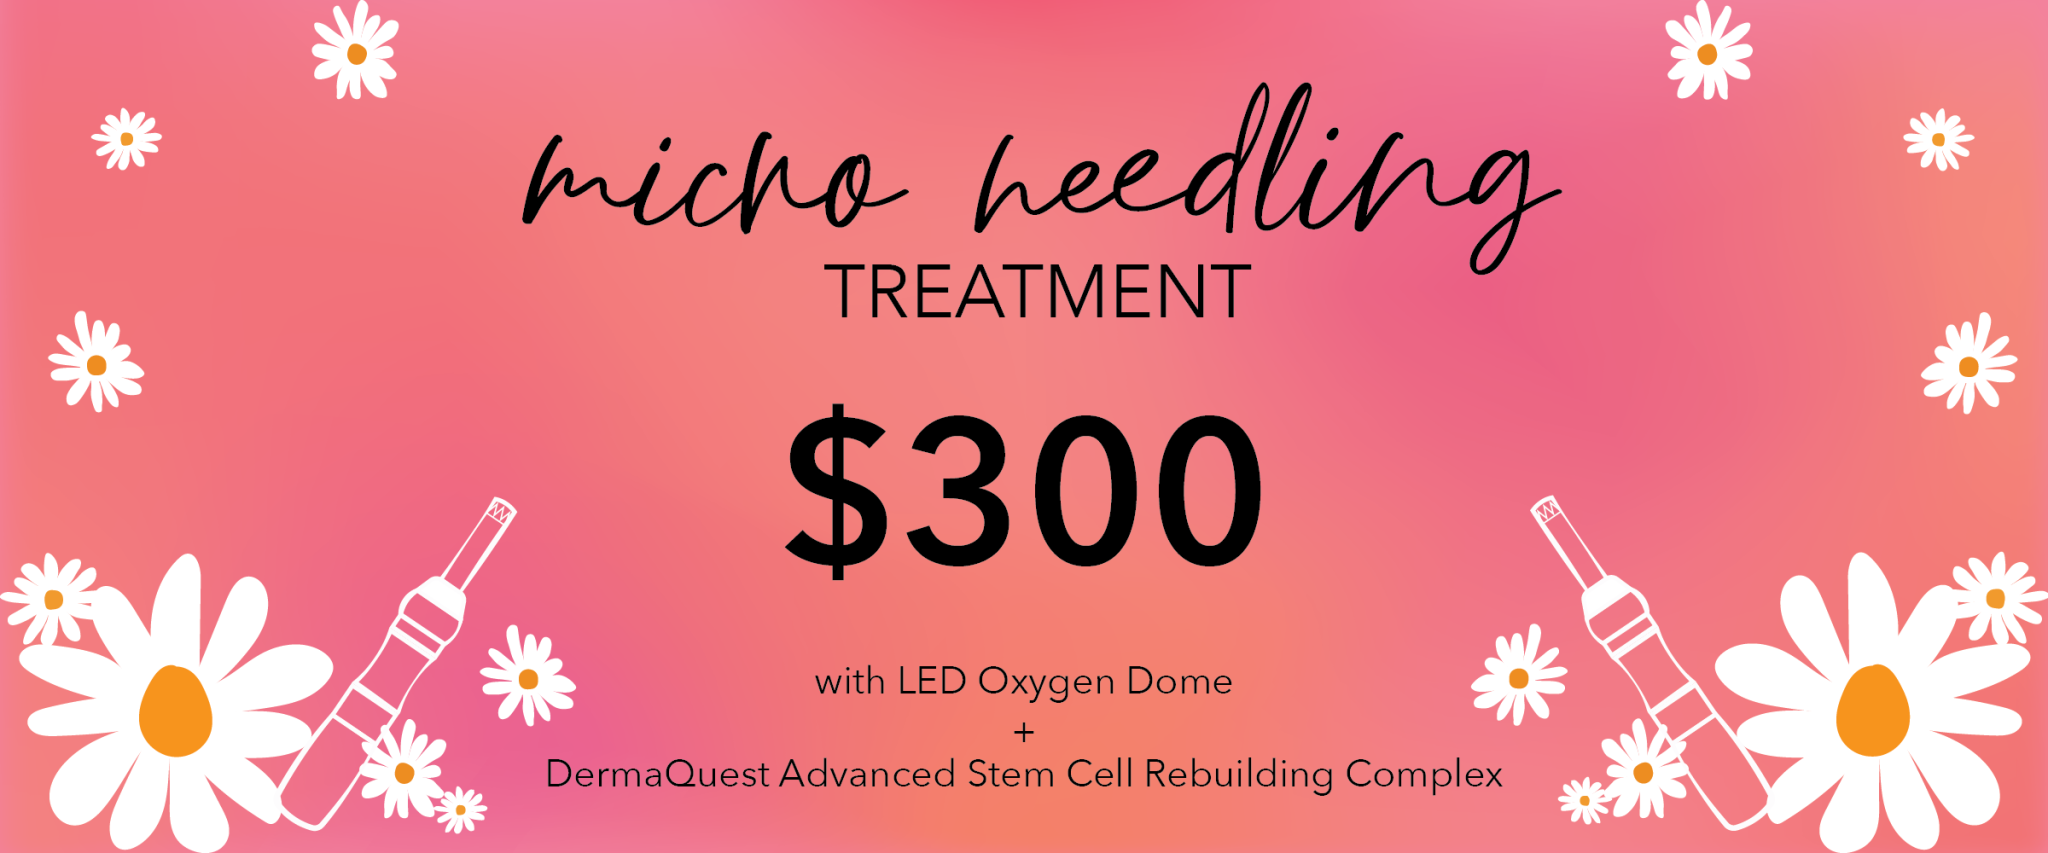 microneedling facial promotion